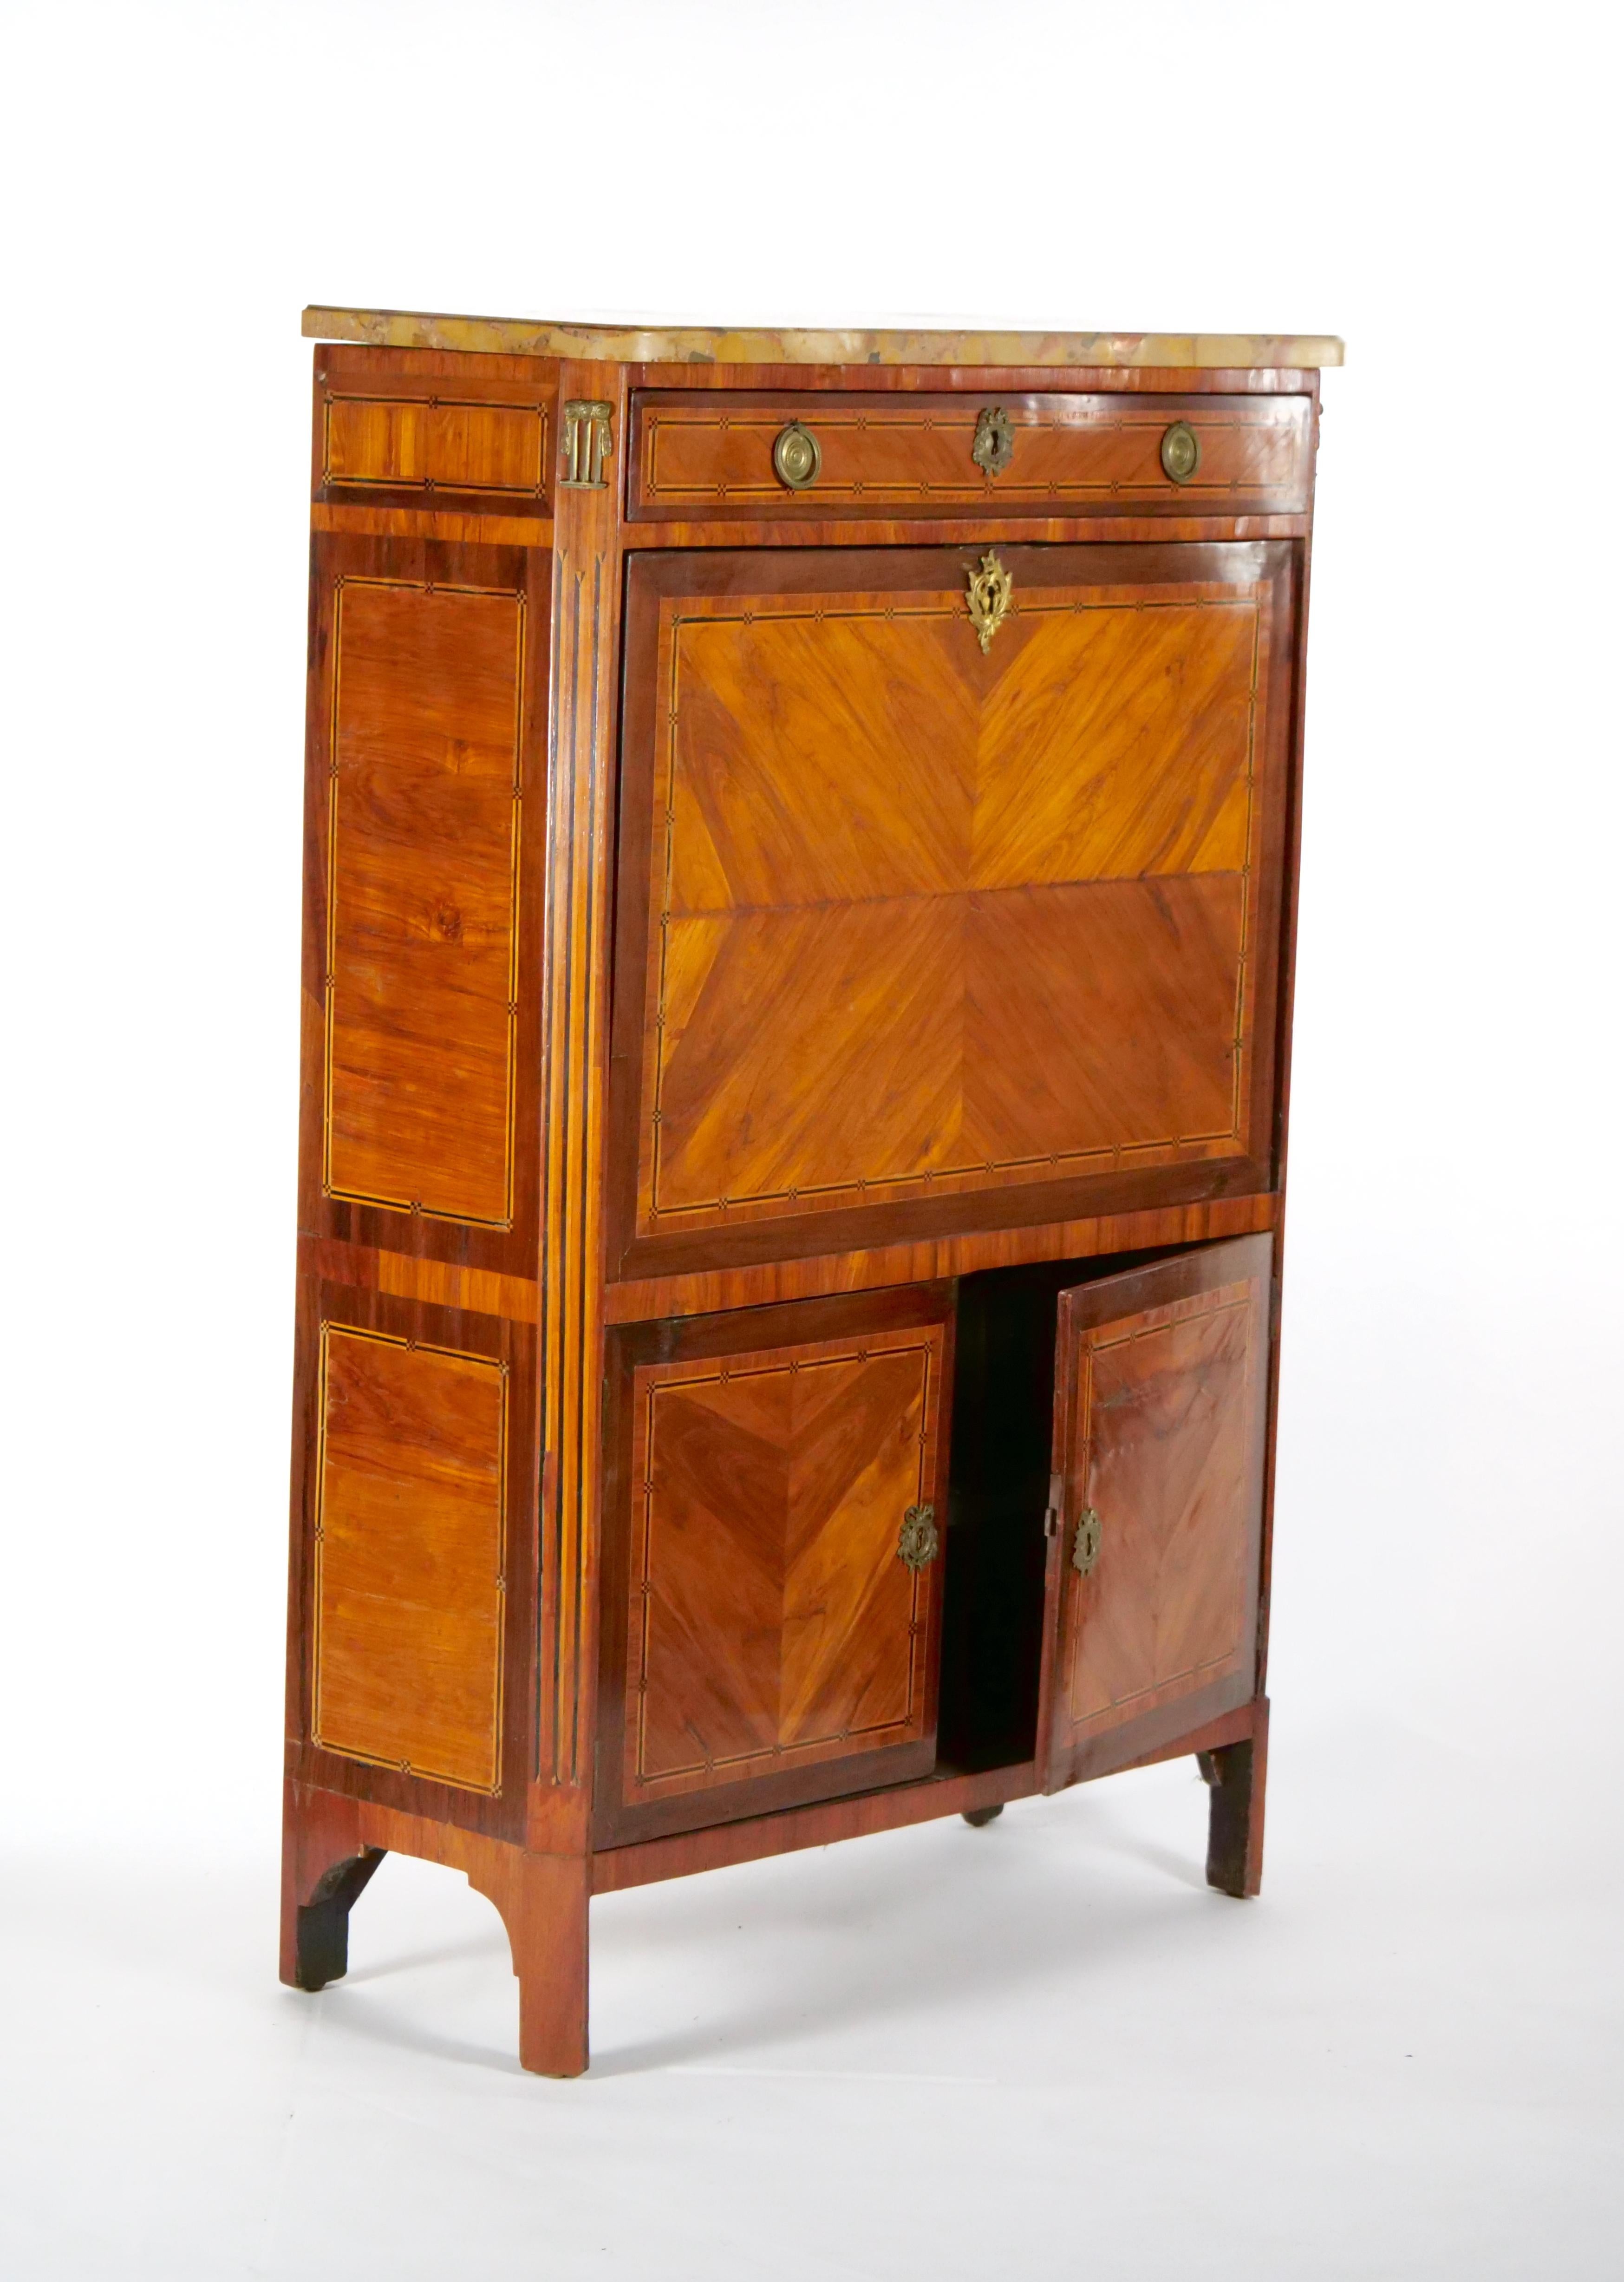 Beautiful craftsmanship Louis XV style secretary chest cabinet desk in a satin / burl wood with exterior front inlay decoration. The secretary features lot of storage drawers above fall-front, followed by additional lower part storage space .